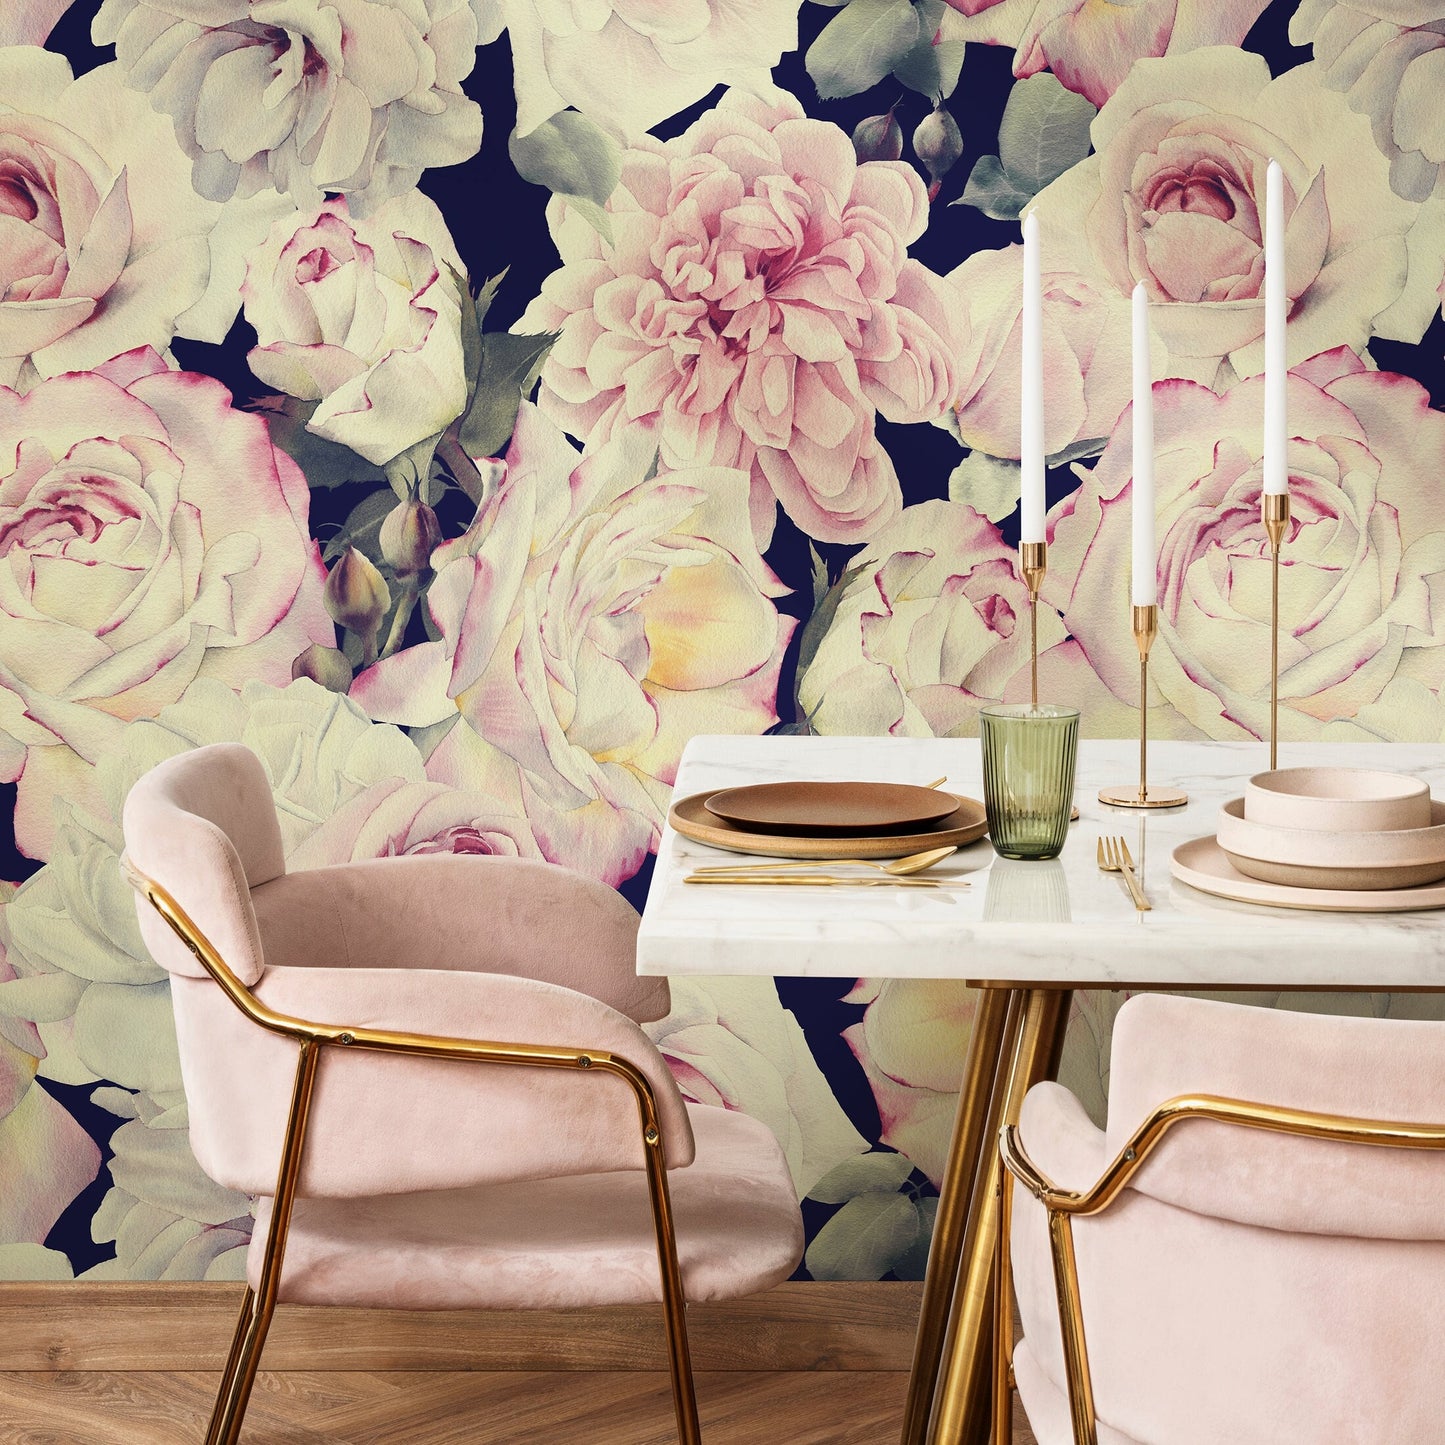 Wallpaper Peel and Stick Wallpaper Removable Wallpaper Home Decor Wall Art Wall Decor Room Decor / Vintage Roses Wallpaper - A221